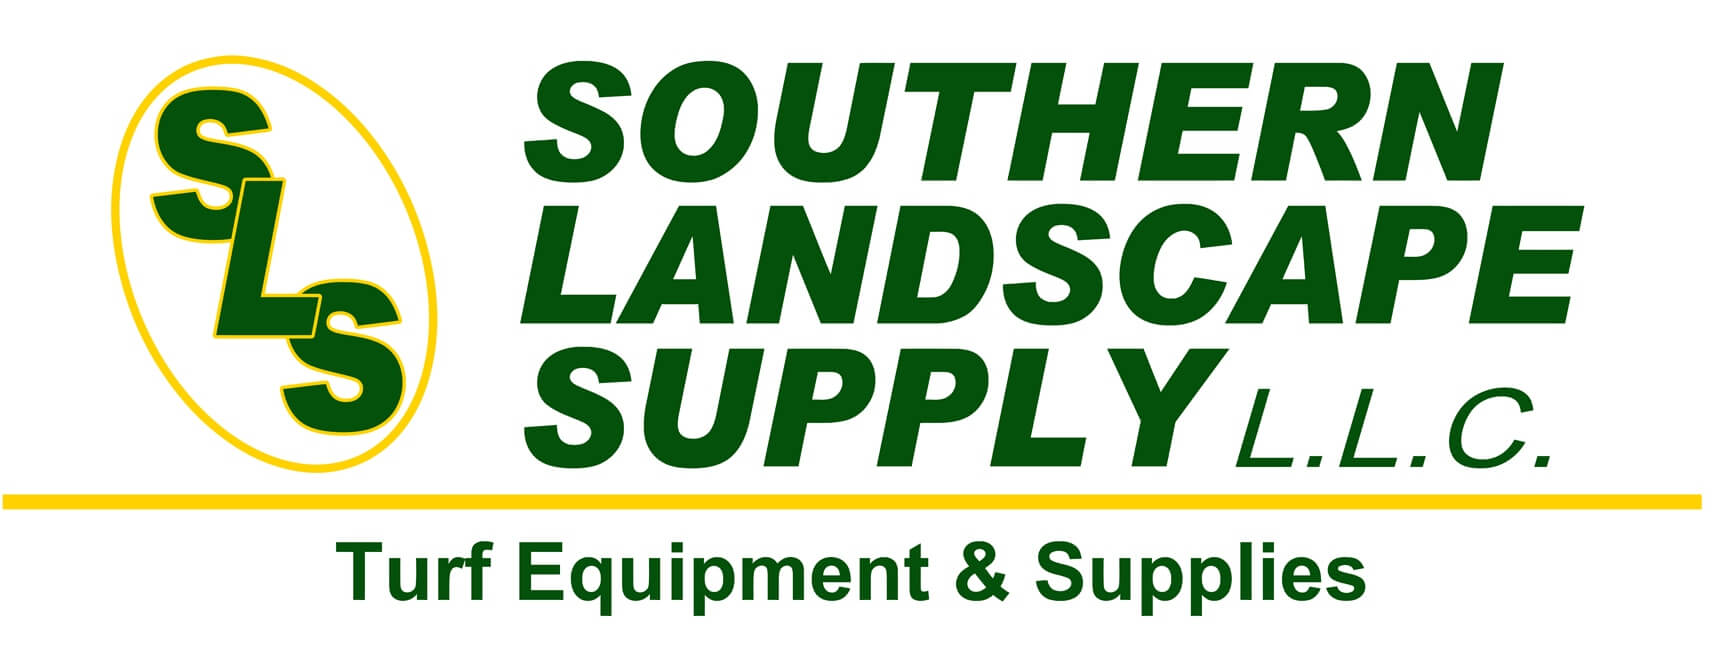 Privacy Policy Southern Landscape Supply, Southern Landscape Supply